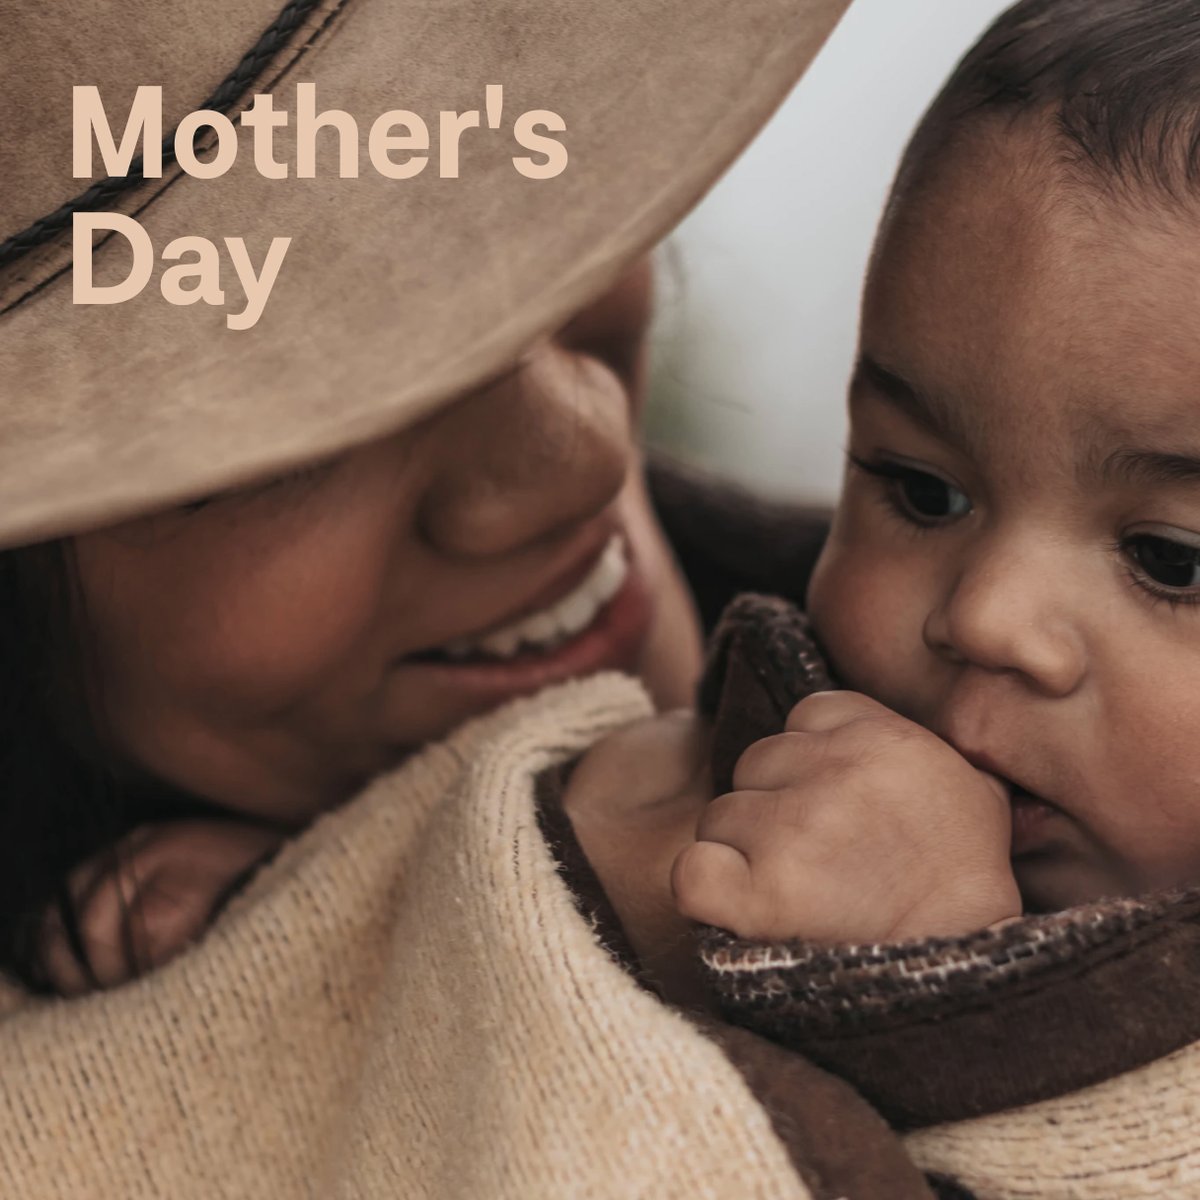 Schedule the soundtrack for Mother’s Day! 🎵 Remind your customers to show mom some extra appreciation with soft songs about mothers and motherhood. Find the playlist here: bit.ly/4bxJ5gk #MusicforBusiness #SoundtrackYourBrand